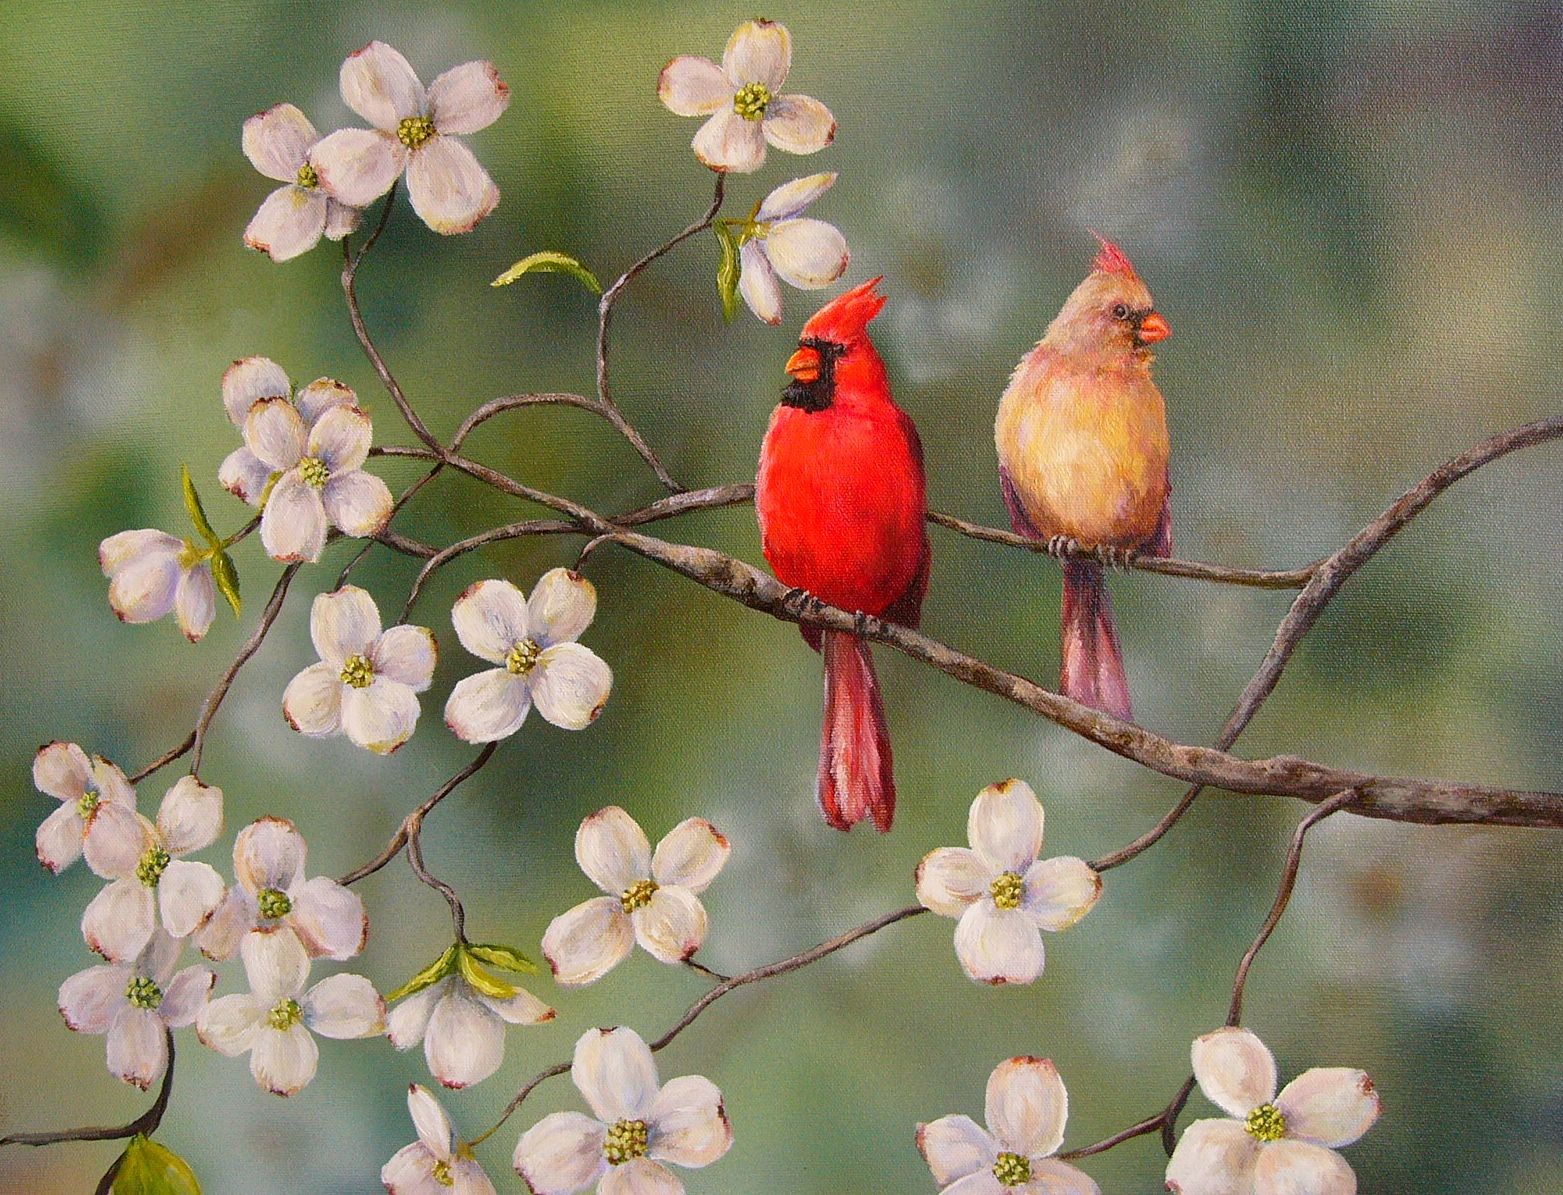 Cardinal Wallpaper Image Photo Picture